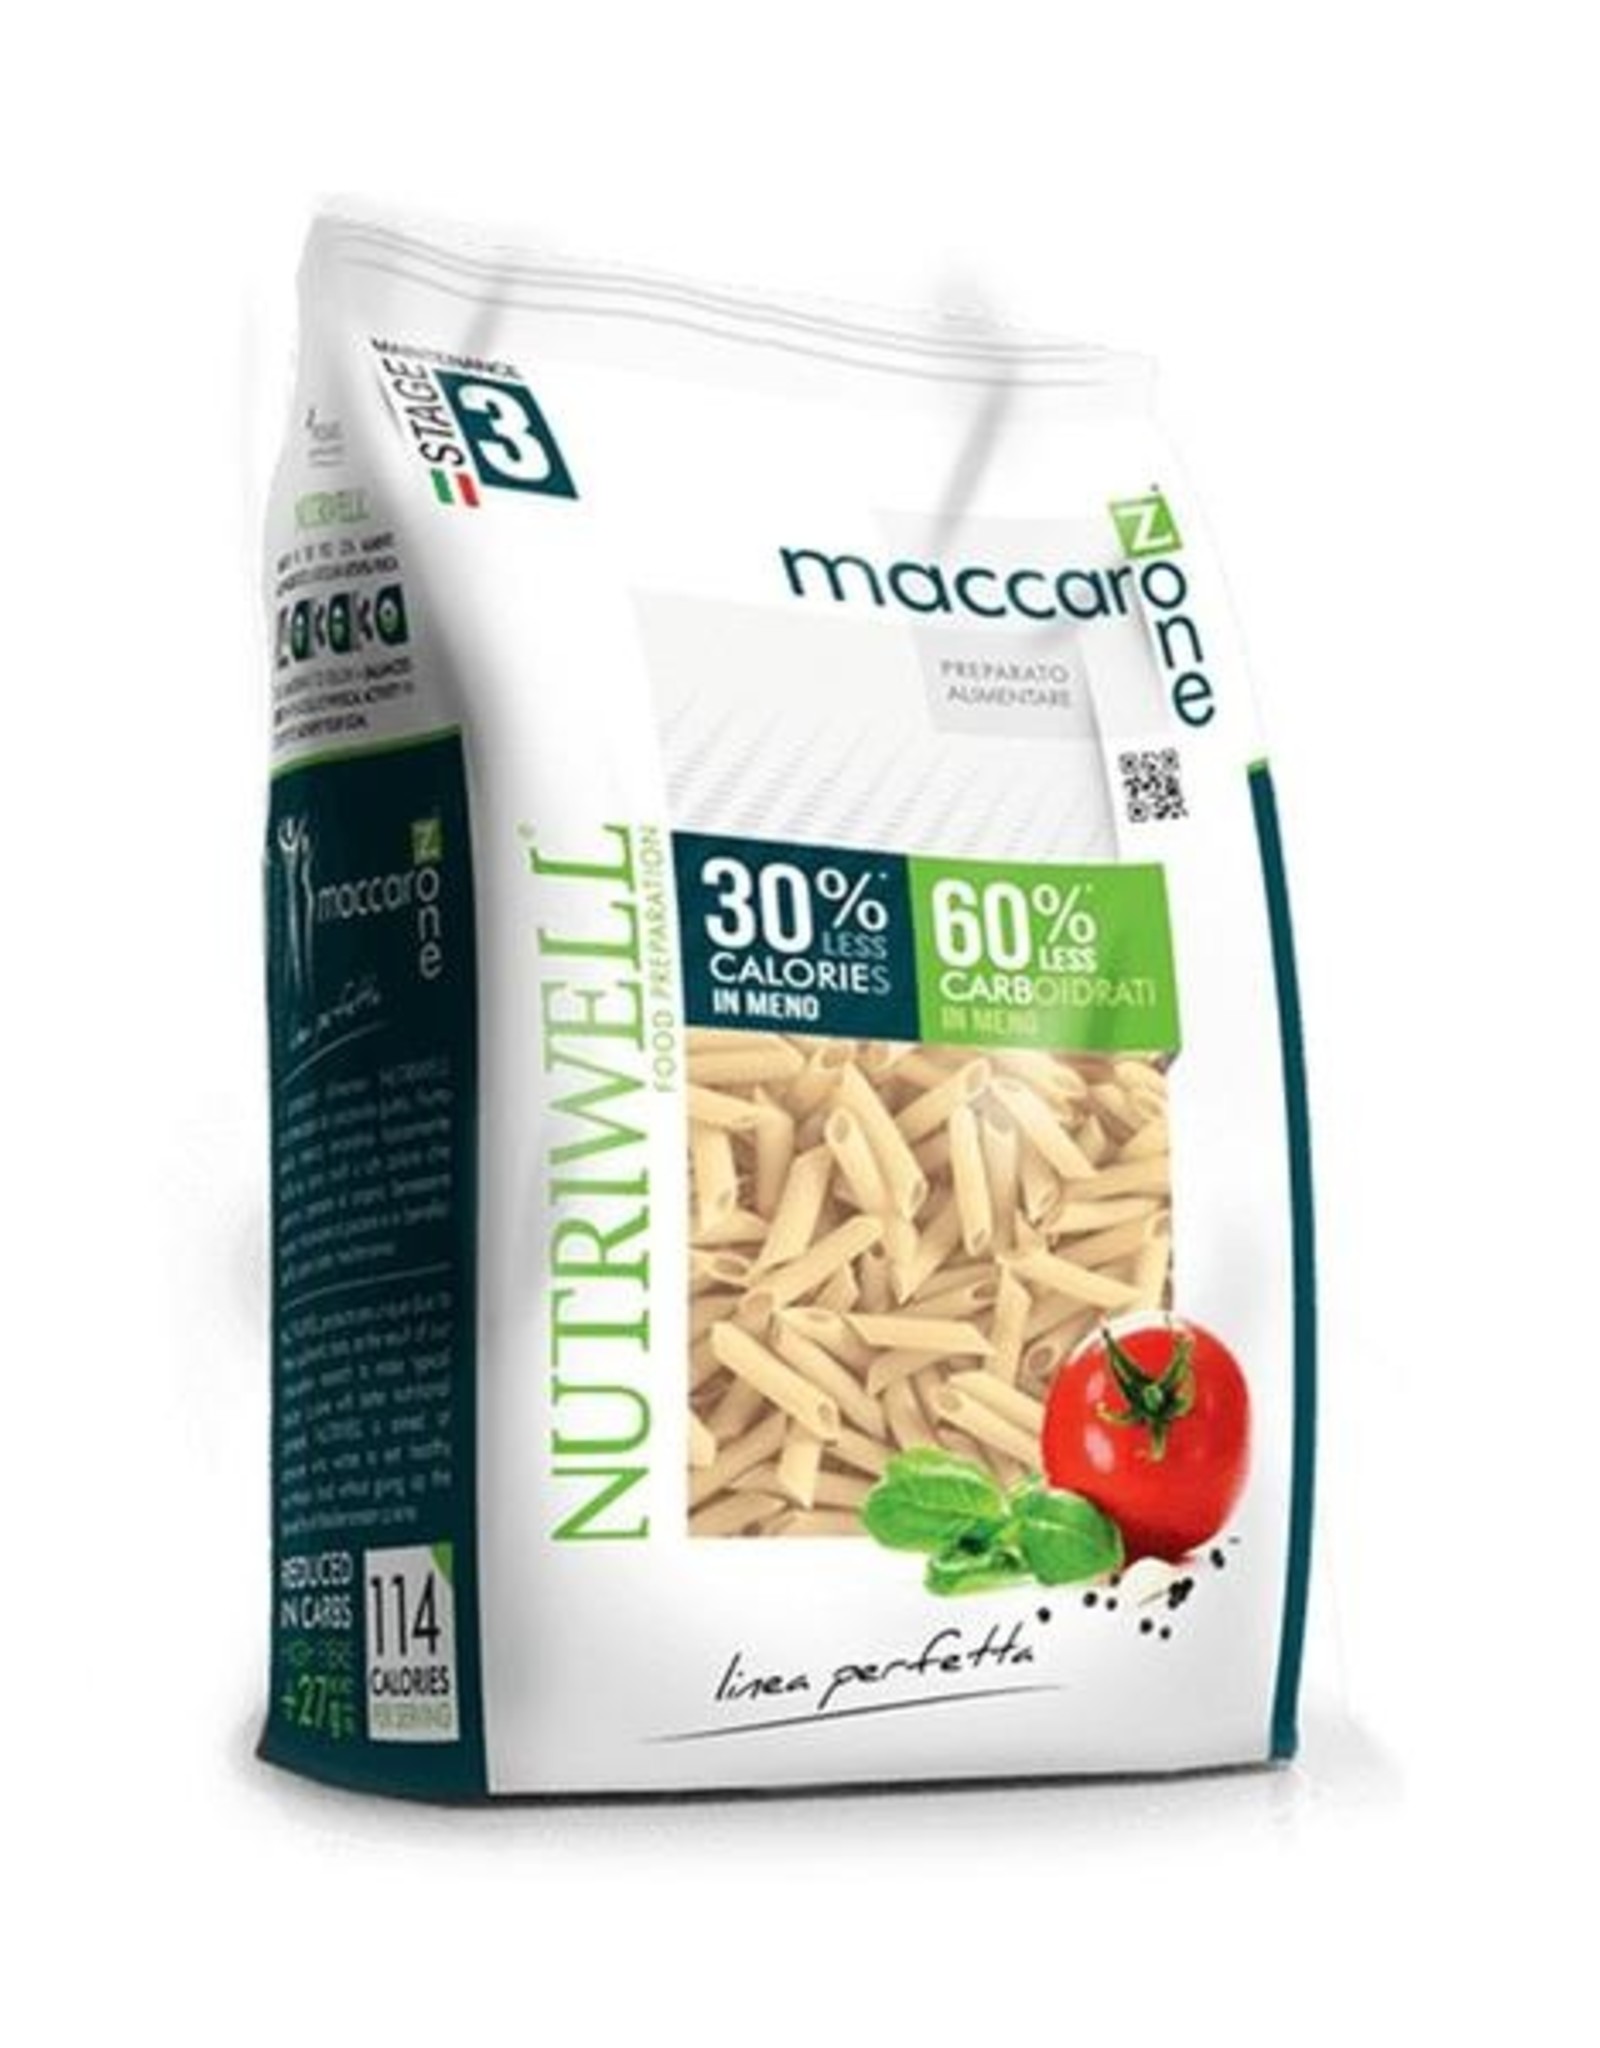 Ciao Nutriwell Penne Pasta